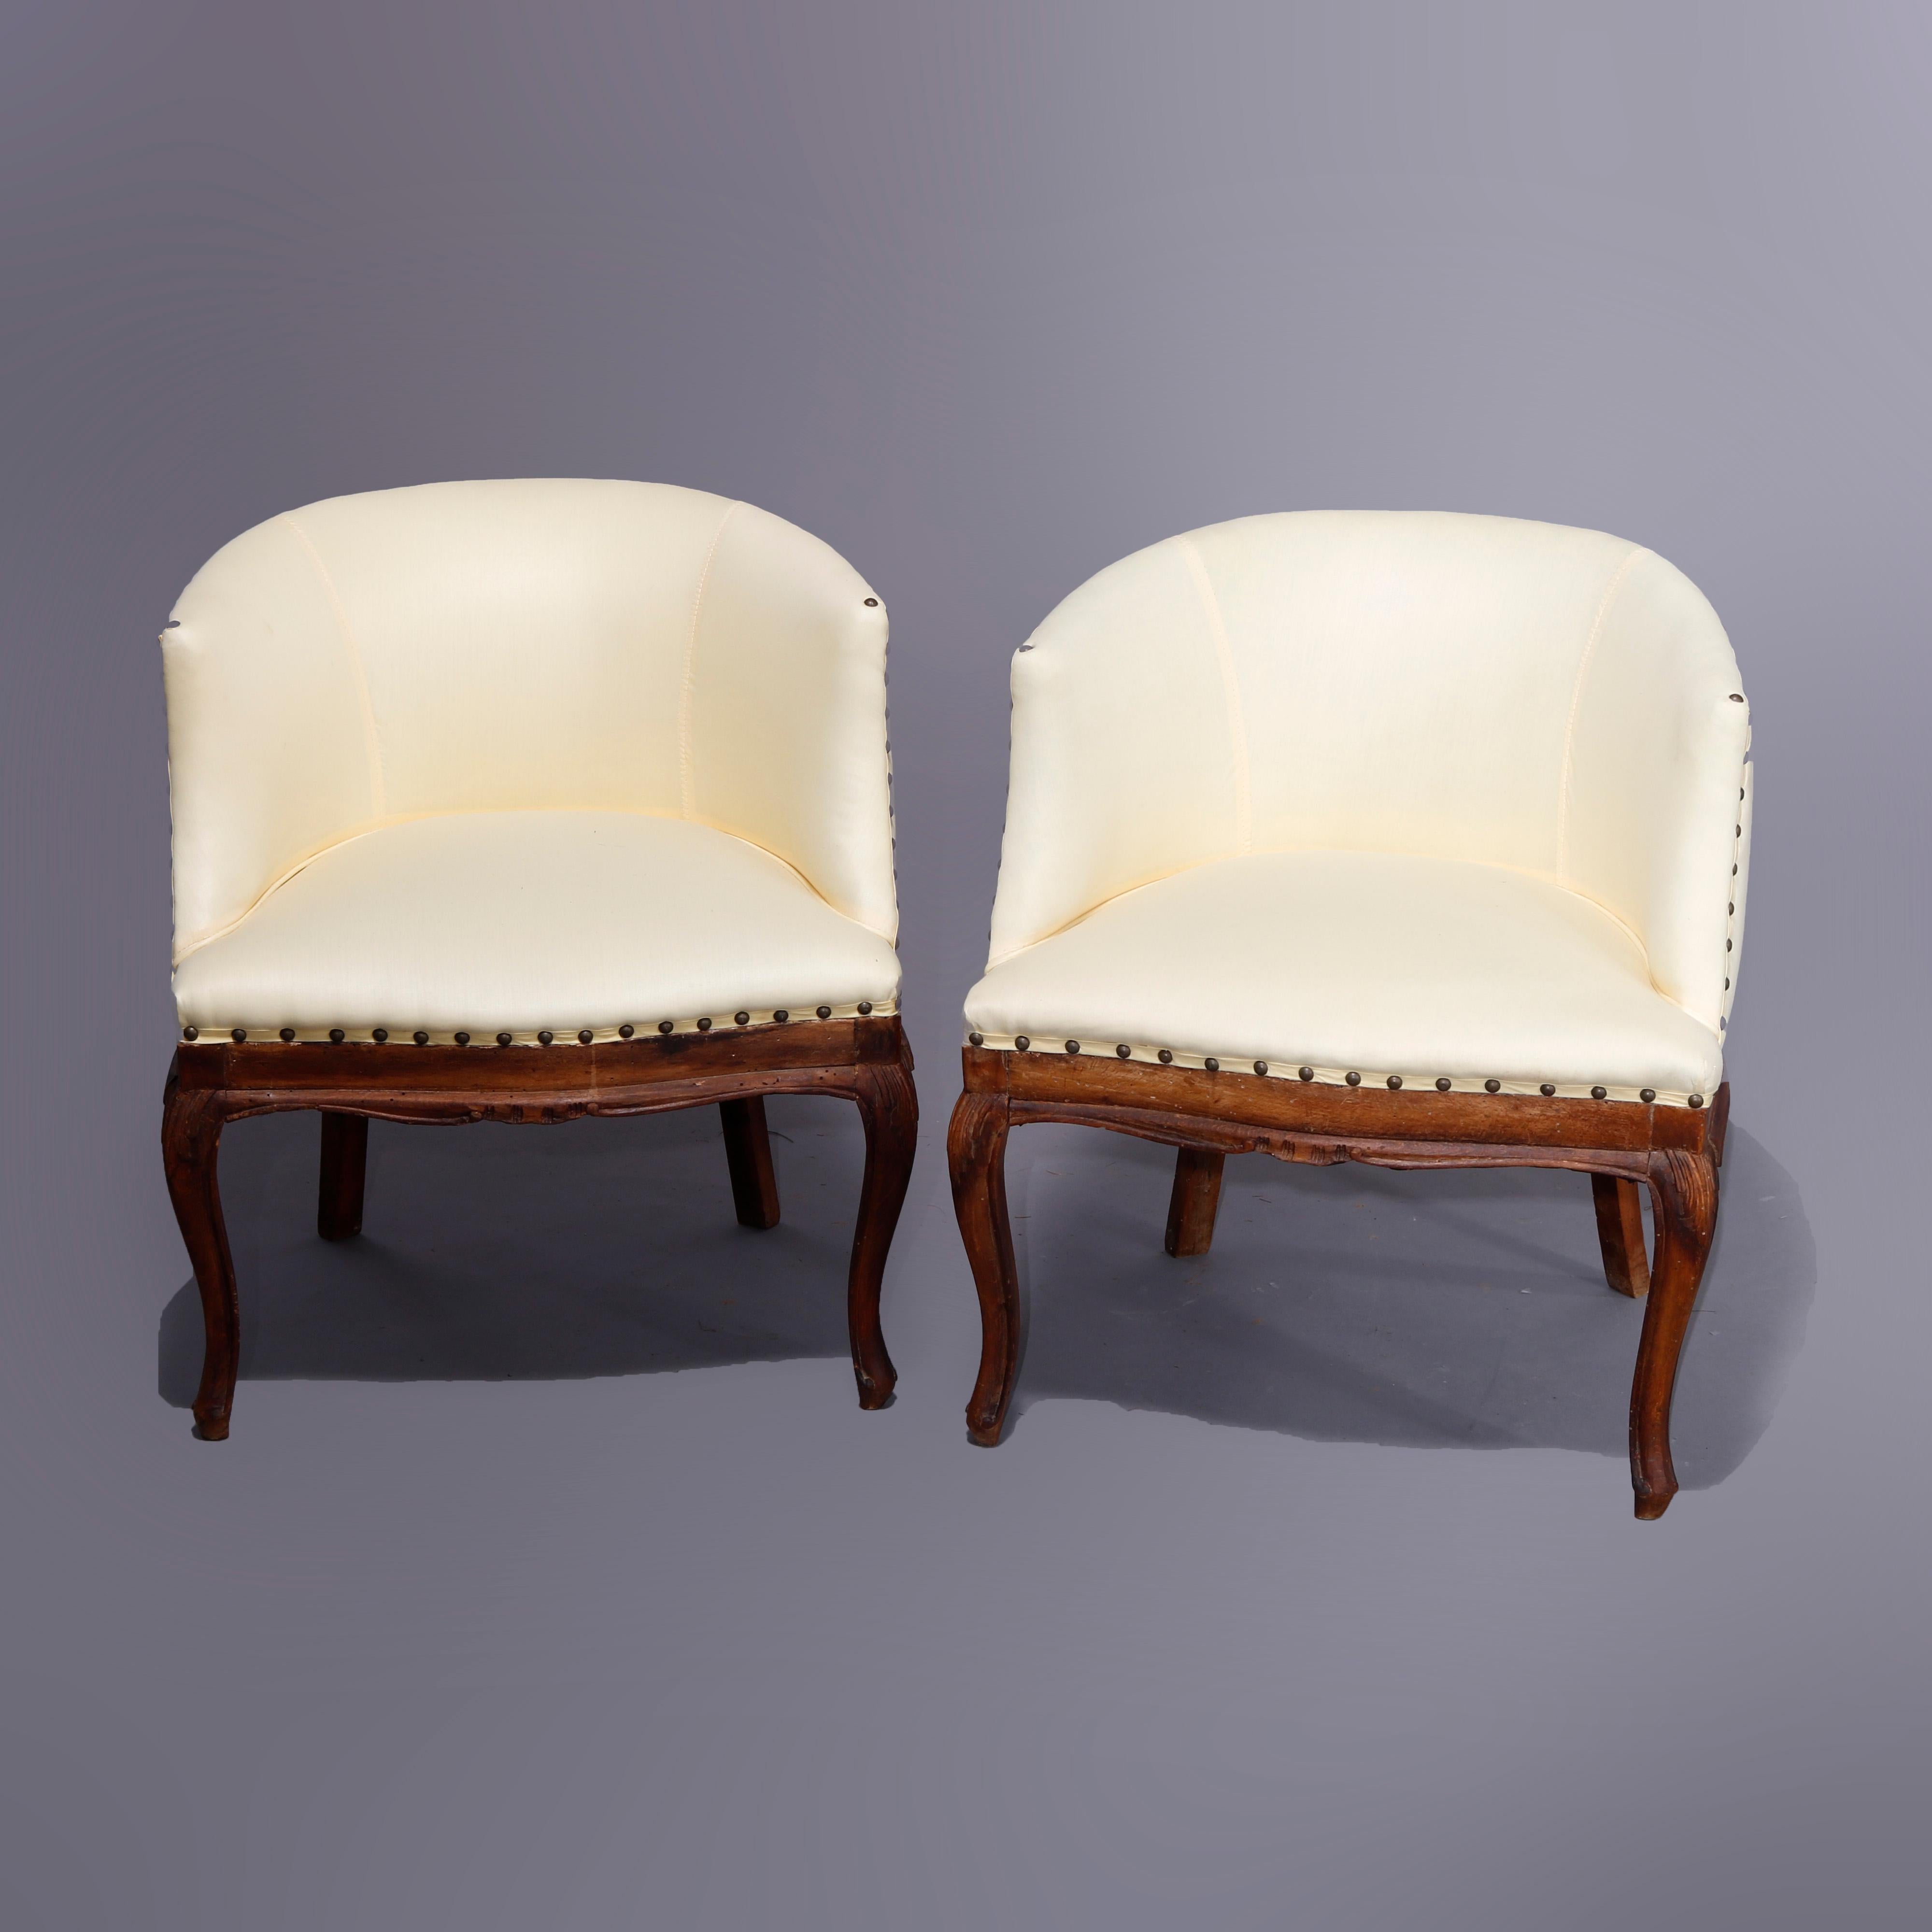 An antique pair of Italian side or lounge armchairs offer curved upholstered backs over walnut bases having cabriole legs with carved acanthus knees, newly reupholstered, late 18th to early 19th century.

Measures - 25.5''H x 23.5''W x 21.5''D.
 